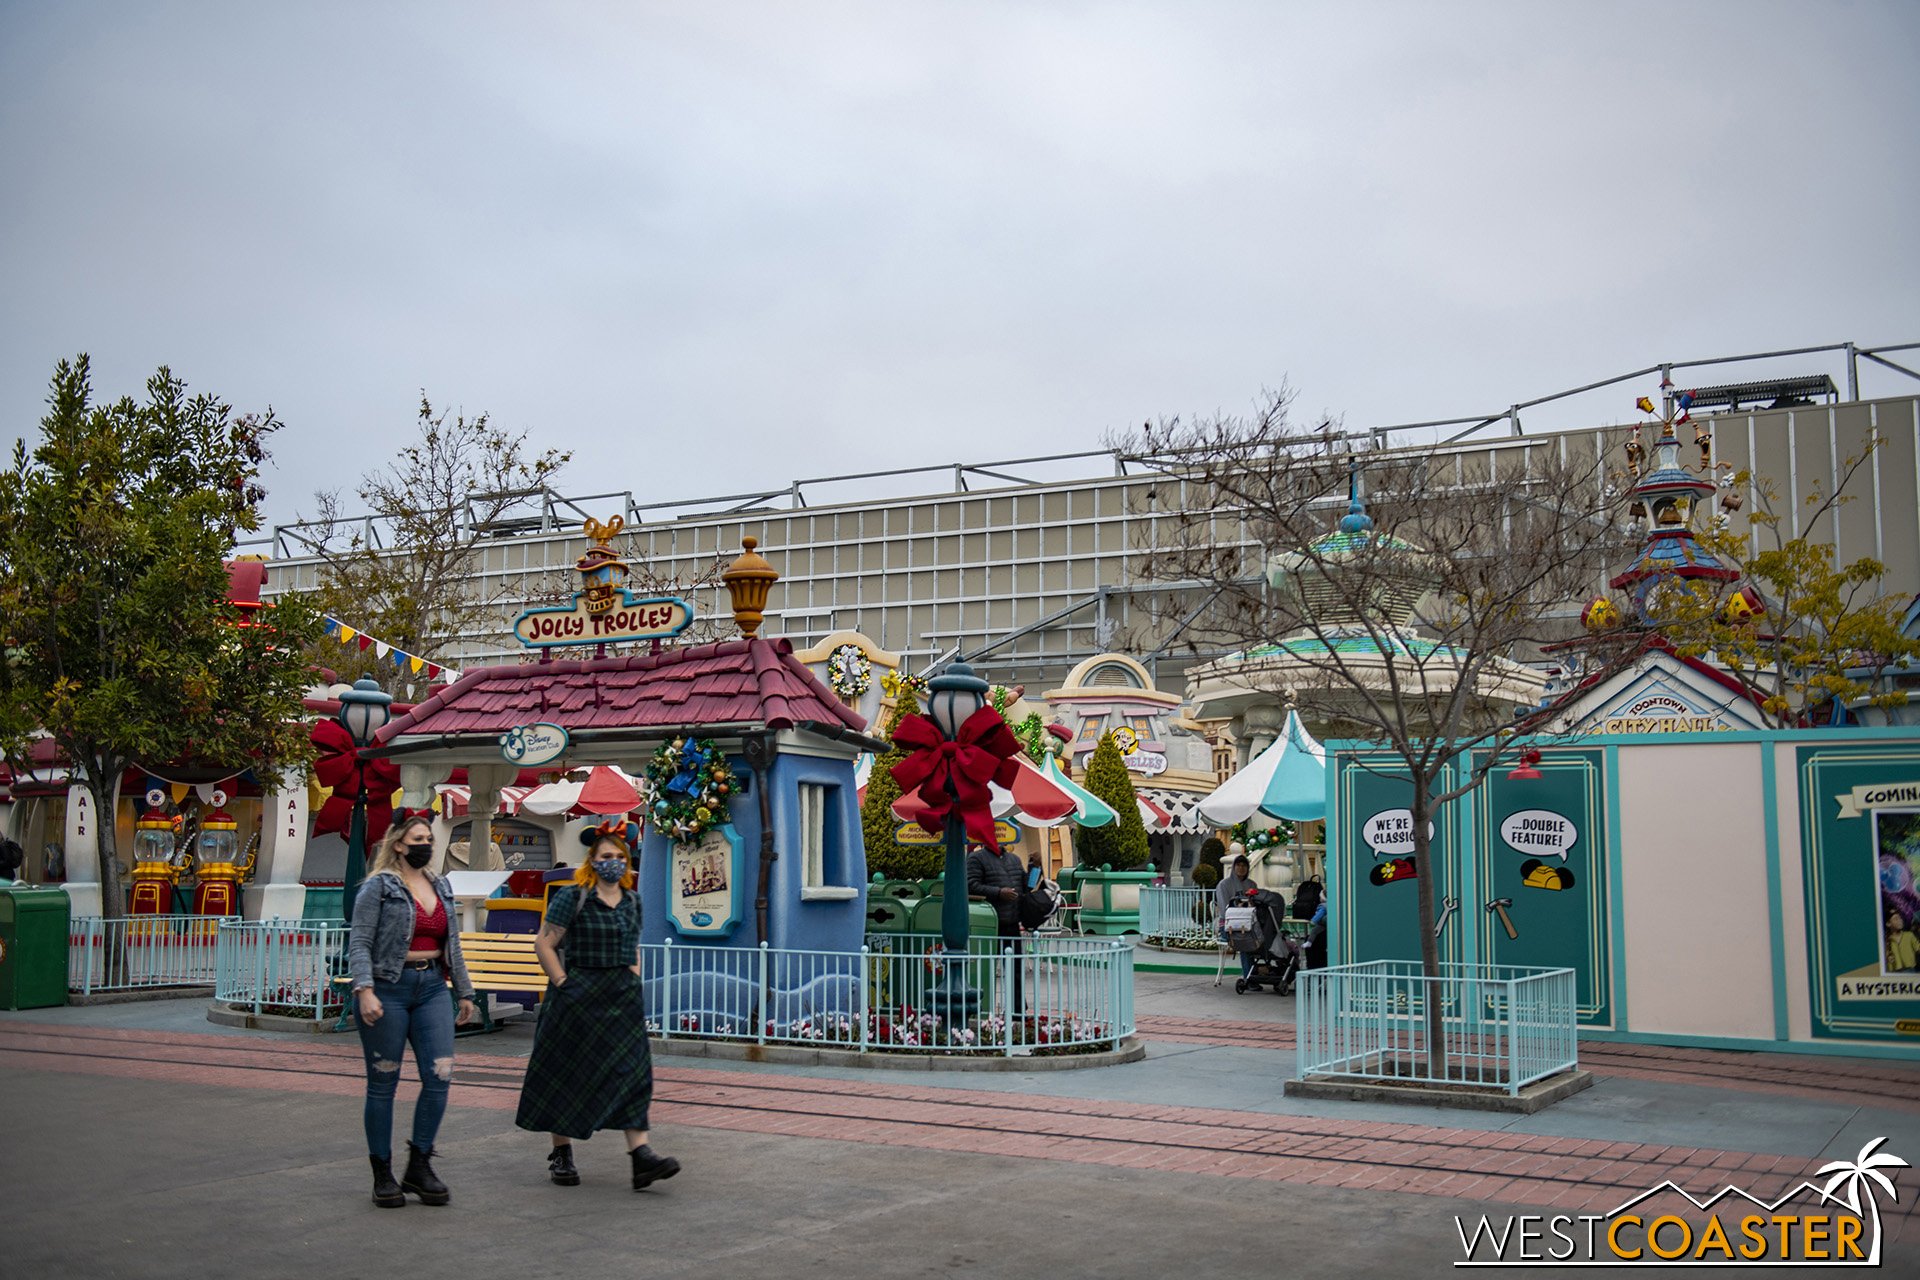  More framing has been put up along the building facade to support the eventual rolling hills facade that will now stretch across all of Toontown. 